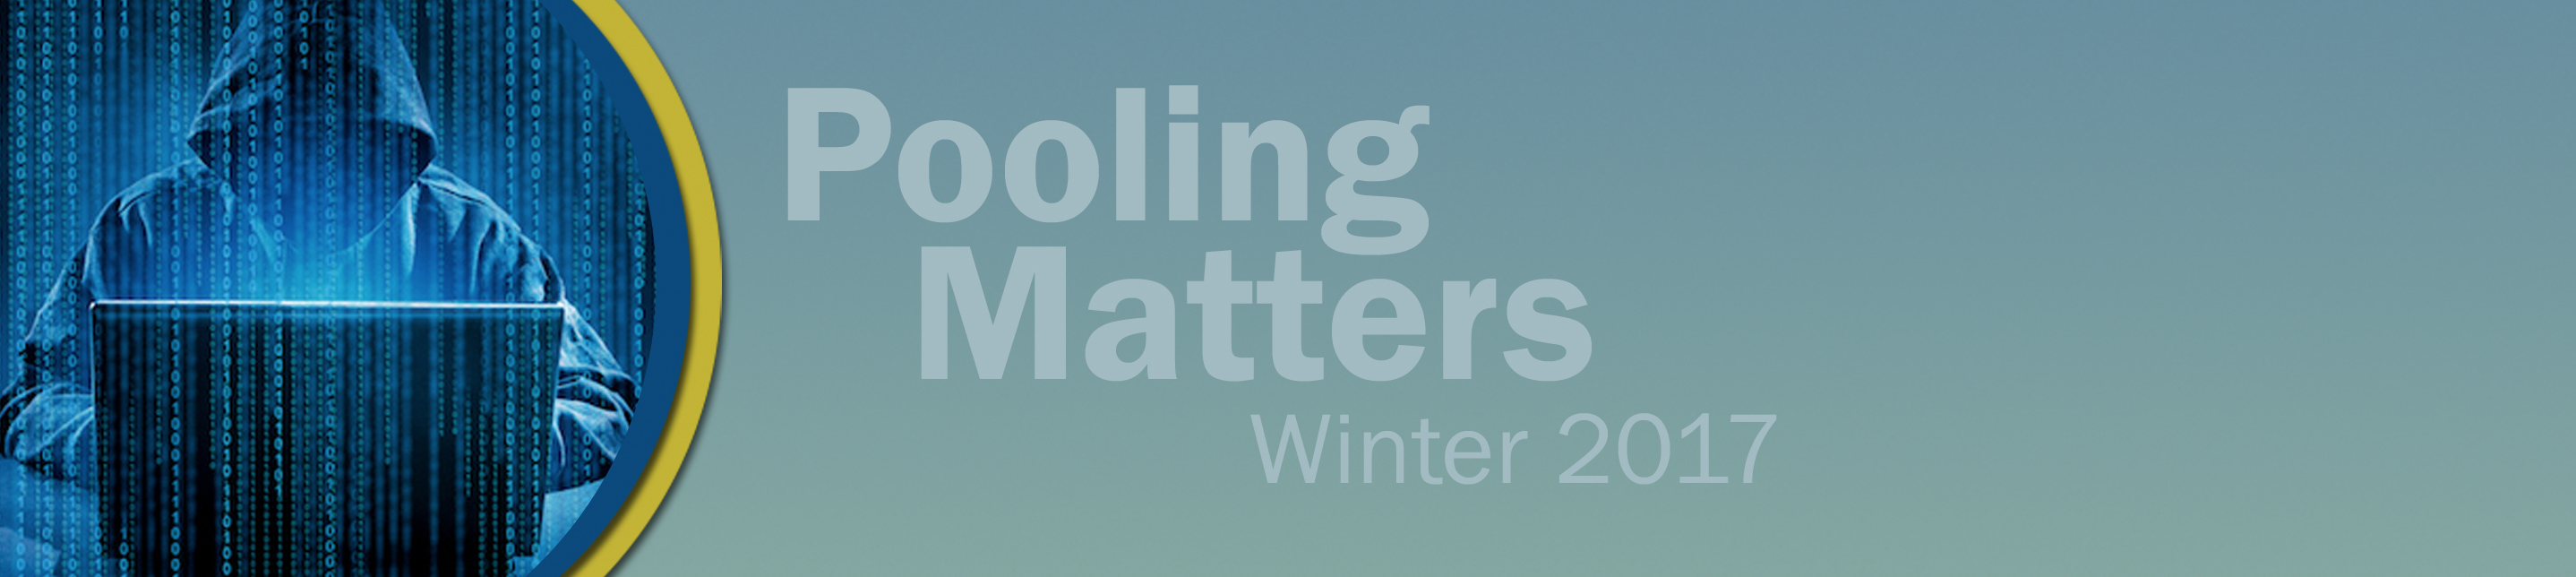 Pooling Matters: 2017 Winter Issue